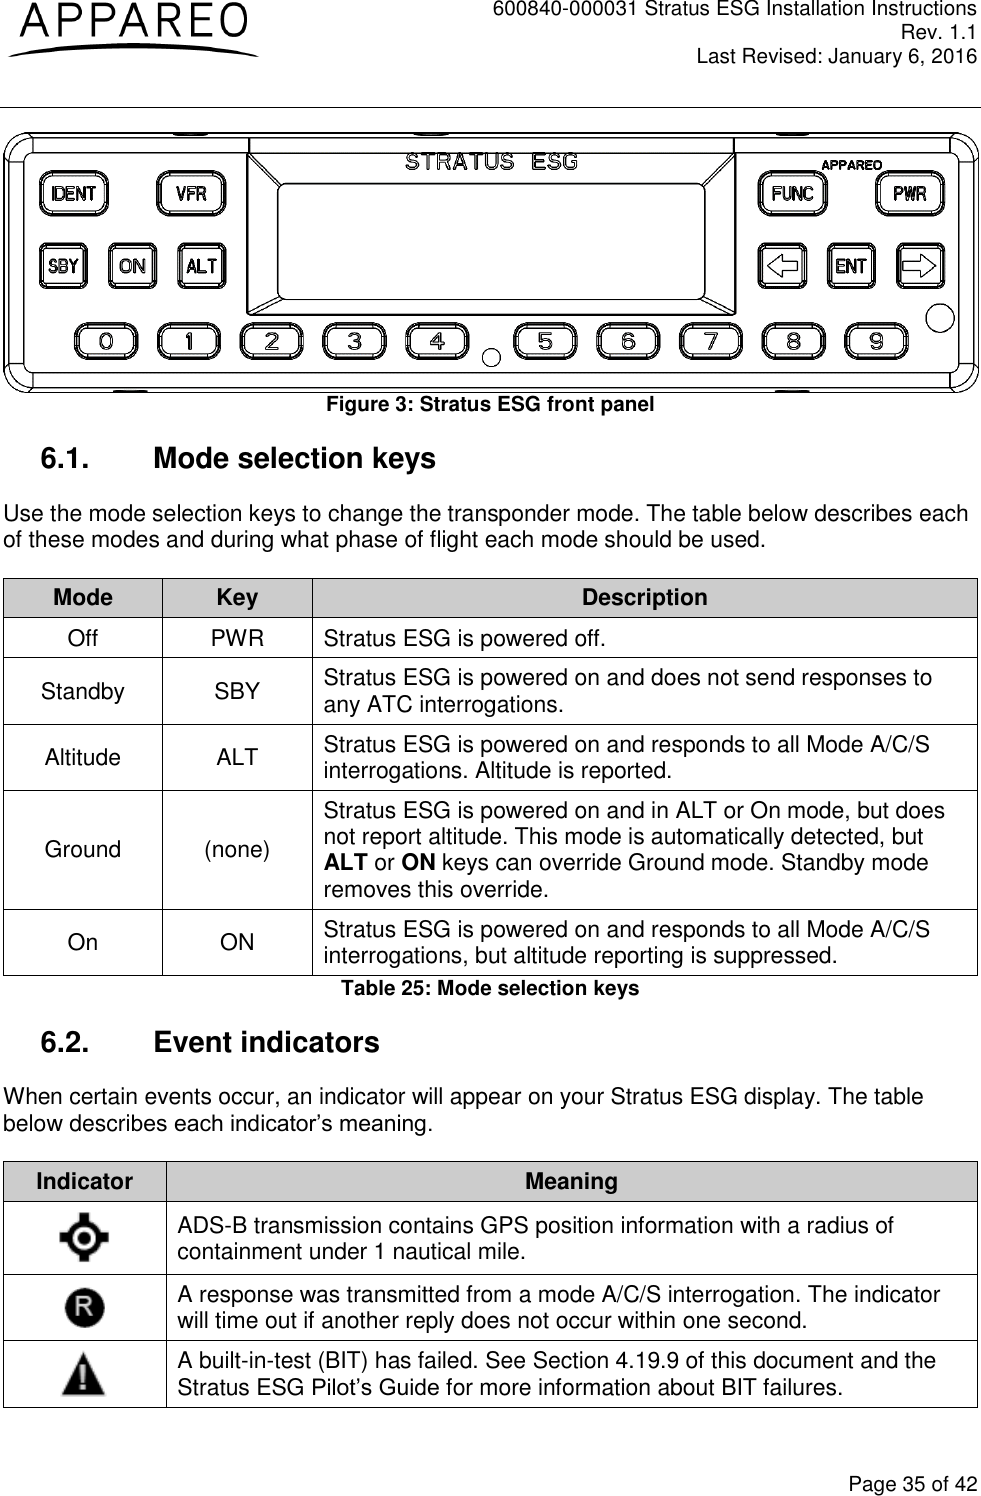 600840-000031 Stratus ESG Installation Instructions Rev. 1.1 Last Revised: January 6, 2016  Page 35 of 42  Figure 3: Stratus ESG front panel 6.1.  Mode selection keys Use the mode selection keys to change the transponder mode. The table below describes each of these modes and during what phase of flight each mode should be used. Mode Key Description Off PWR Stratus ESG is powered off. Standby SBY Stratus ESG is powered on and does not send responses to any ATC interrogations. Altitude ALT Stratus ESG is powered on and responds to all Mode A/C/S interrogations. Altitude is reported. Ground (none) Stratus ESG is powered on and in ALT or On mode, but does not report altitude. This mode is automatically detected, but ALT or ON keys can override Ground mode. Standby mode removes this override. On ON Stratus ESG is powered on and responds to all Mode A/C/S interrogations, but altitude reporting is suppressed. Table 25: Mode selection keys 6.2.  Event indicators When certain events occur, an indicator will appear on your Stratus ESG display. The table below describes each indicator’s meaning. Indicator Meaning  ADS-B transmission contains GPS position information with a radius of containment under 1 nautical mile.  A response was transmitted from a mode A/C/S interrogation. The indicator will time out if another reply does not occur within one second.  A built-in-test (BIT) has failed. See Section 4.19.9 of this document and the Stratus ESG Pilot’s Guide for more information about BIT failures. 